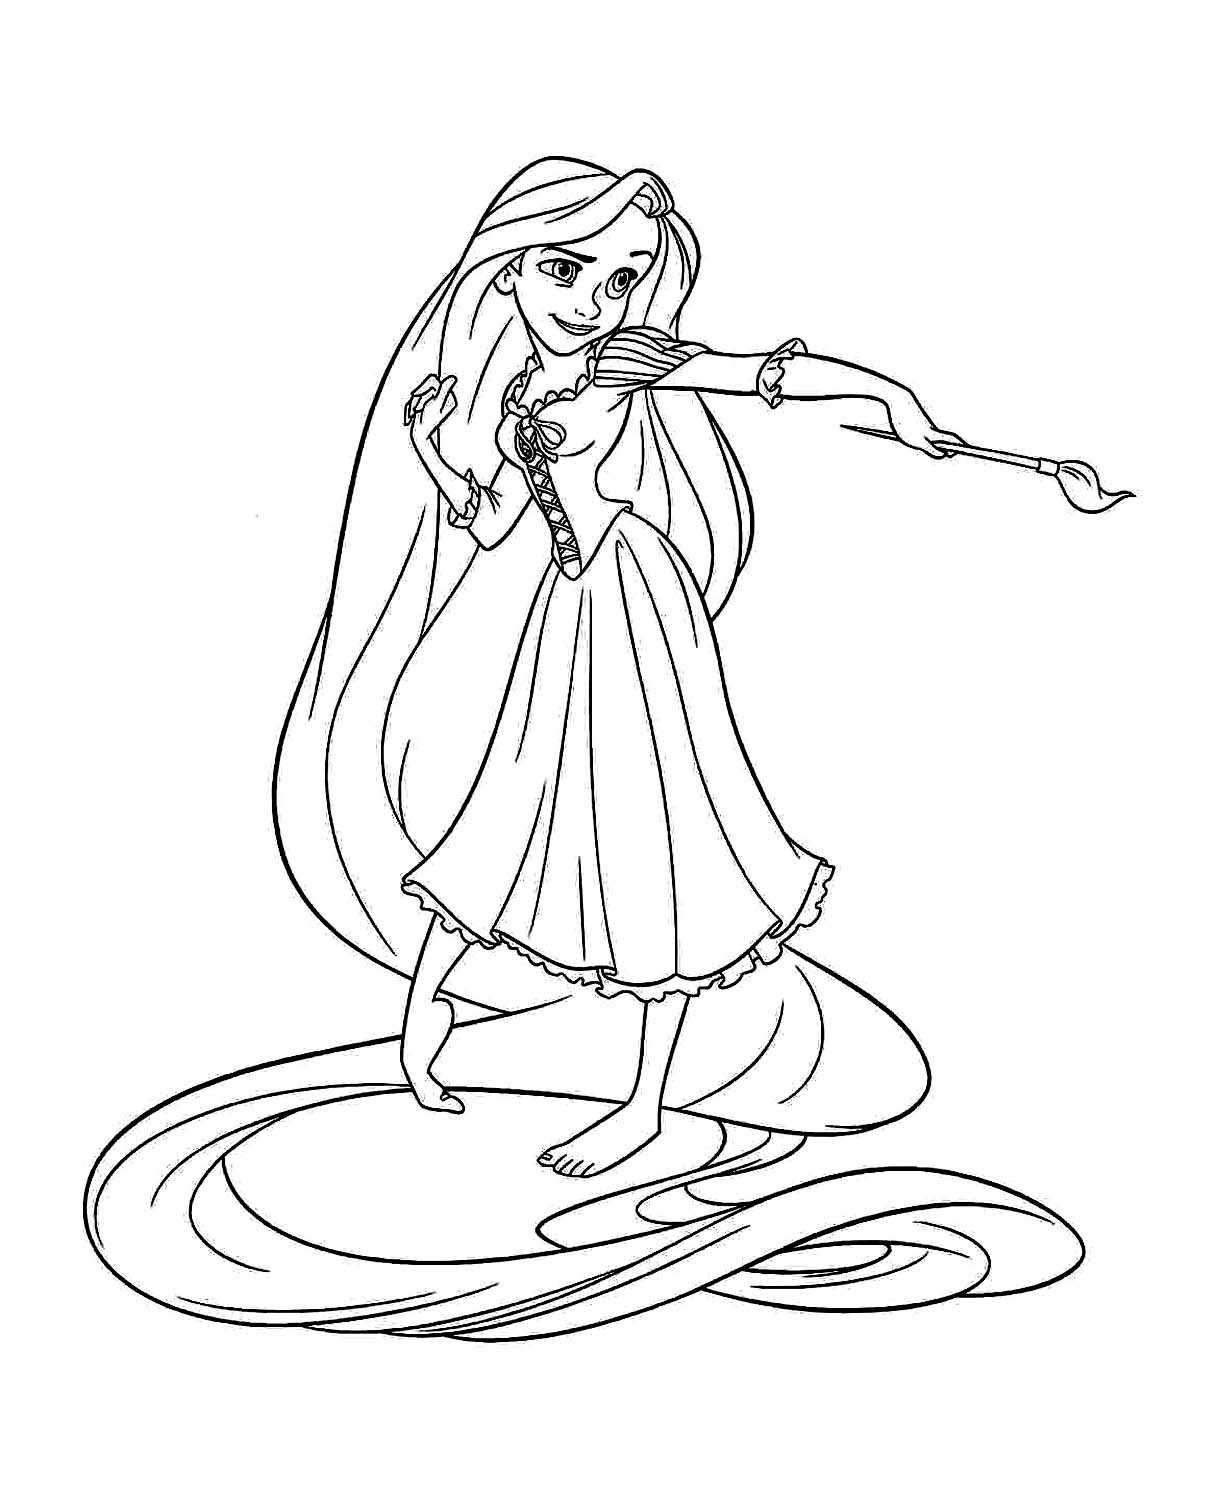 Download Tangled for kids - Tangled Kids Coloring Pages